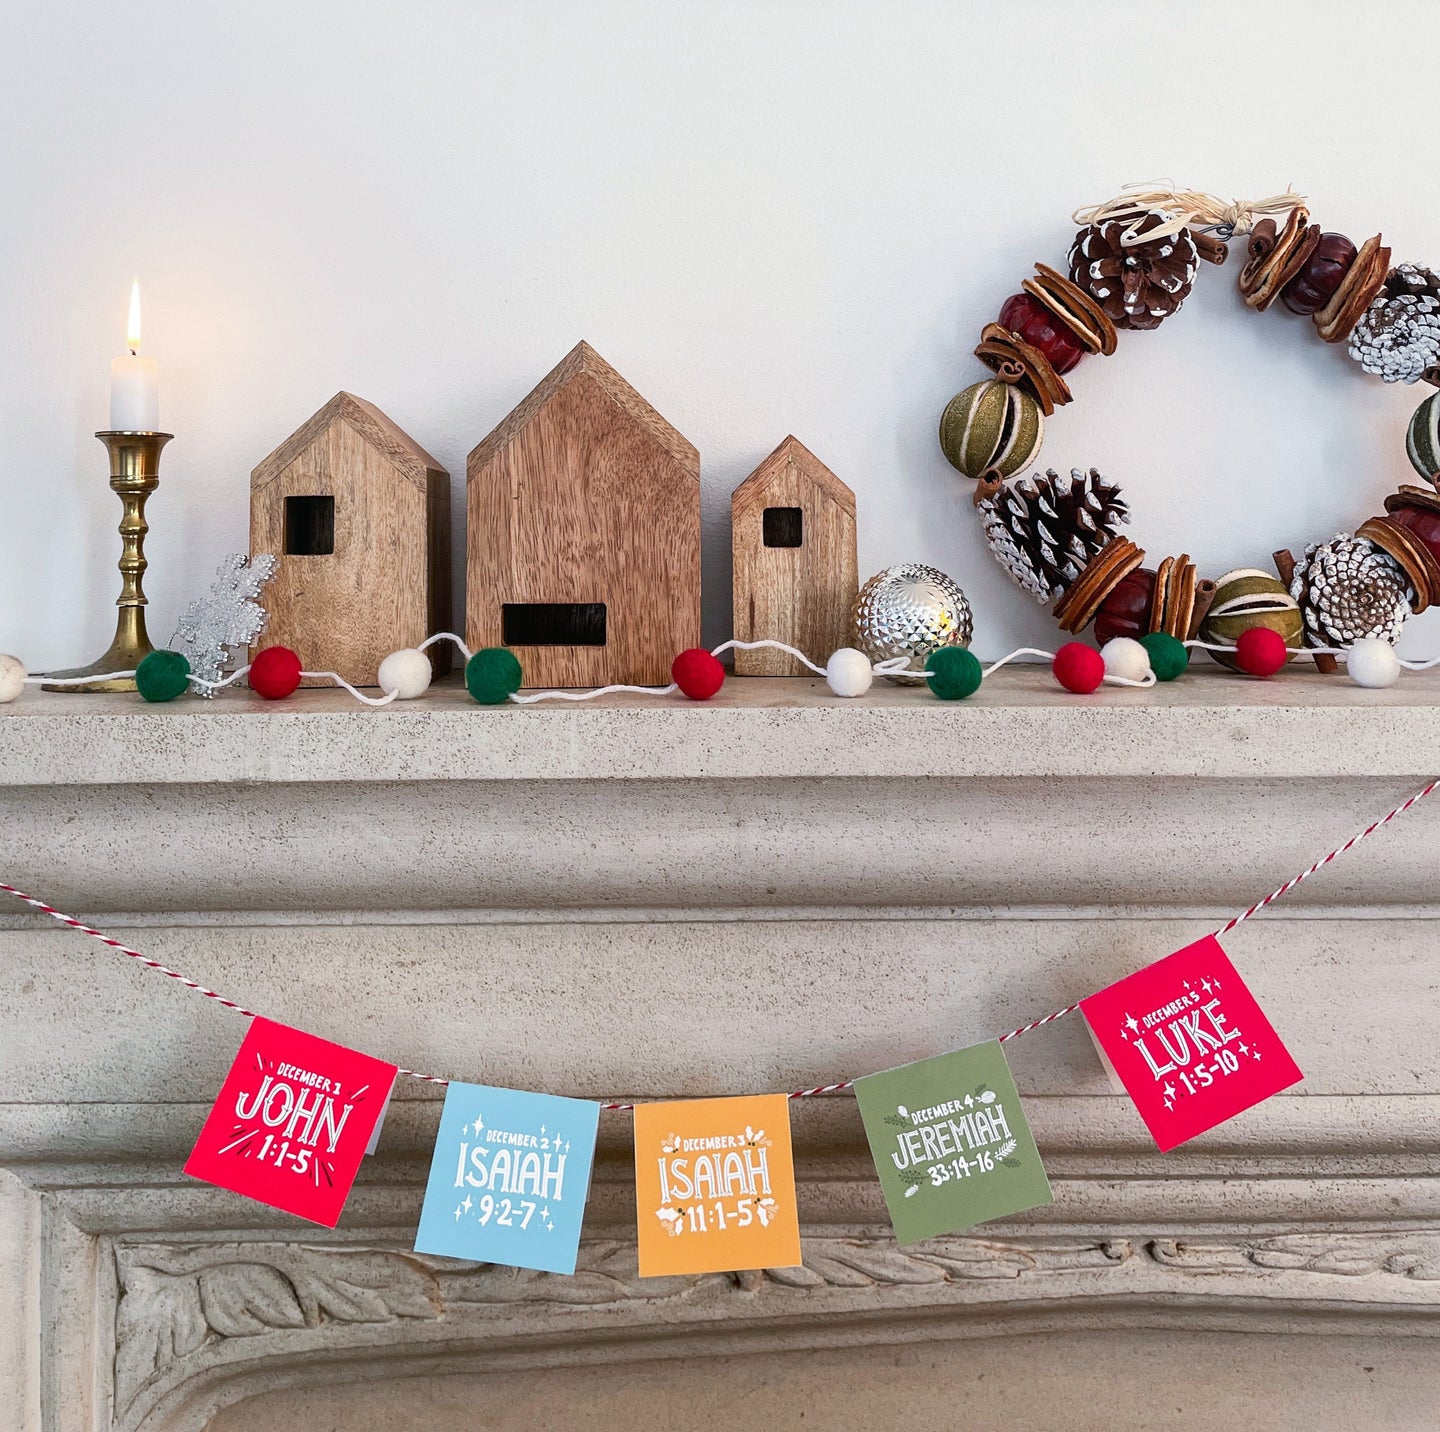 A picture of a fireplace mantle with a candle lit, small houses and a Christmas wreath. Hanging on the mantle on a string are the advent calendar cards showing the Bible verses. 